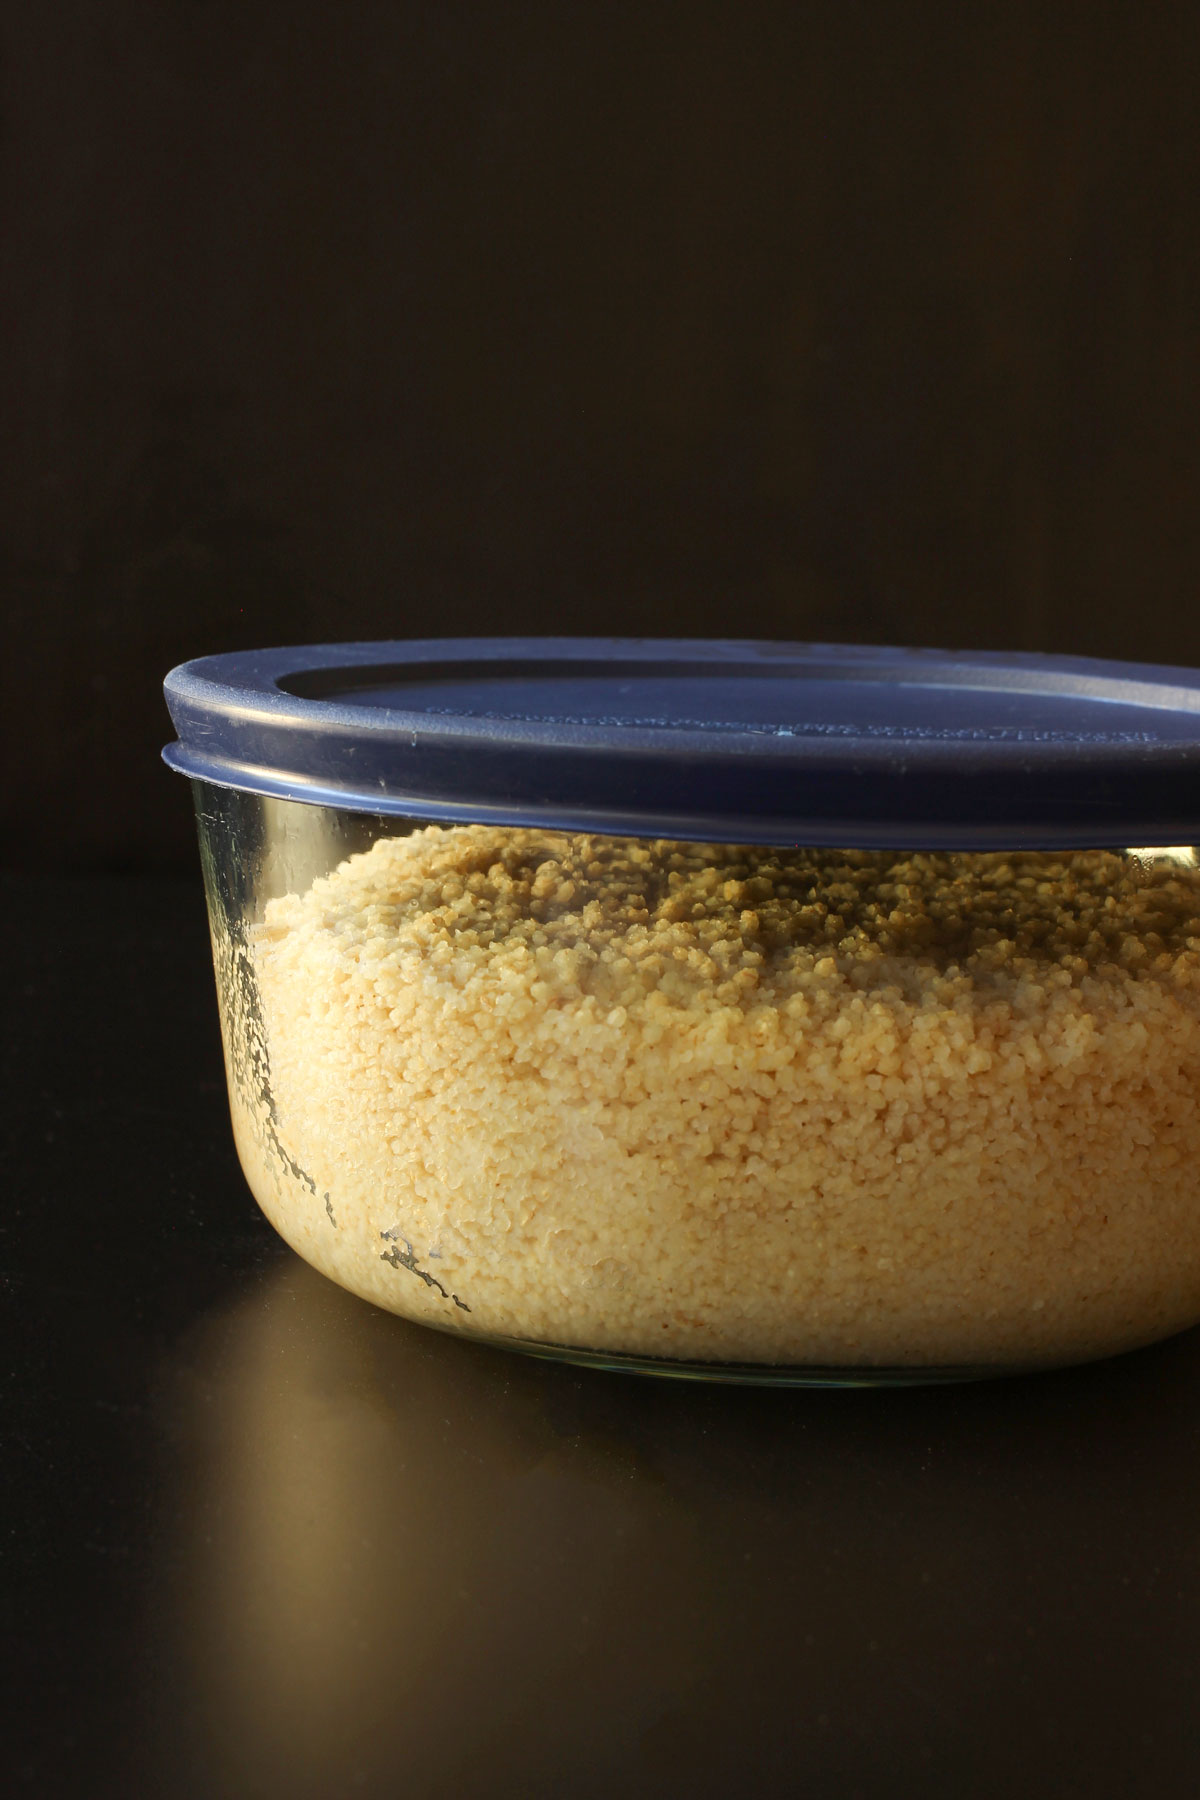 couscous absorbing broth in glass bowl with lid.